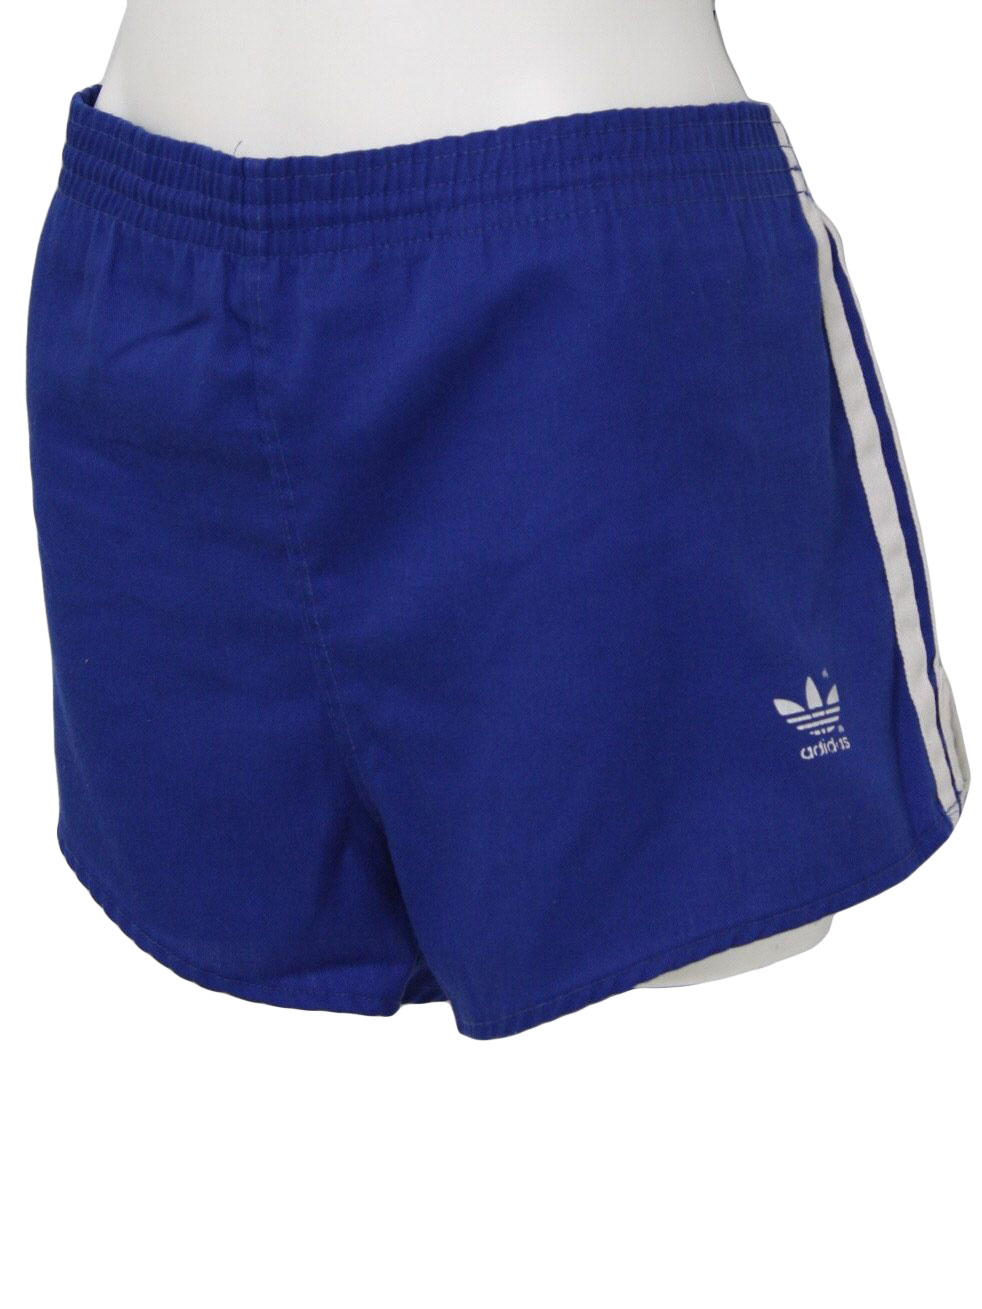 80s Vintage Adidas Shorts: 80s -Adidas- Mens blue and white